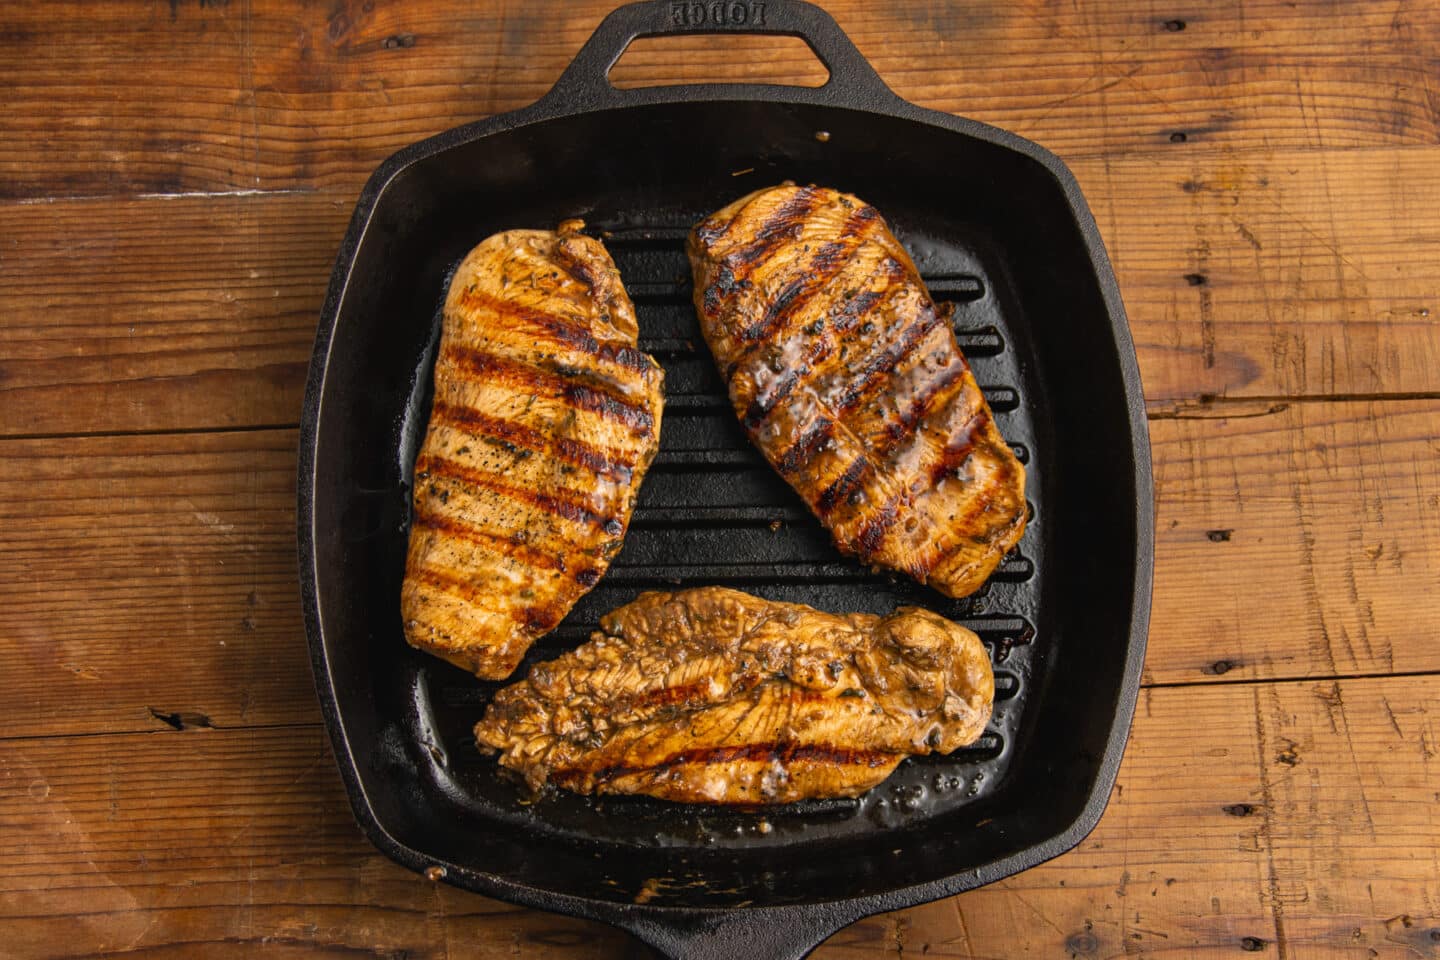 This is a picture of the chicken cooking in a grill pan.